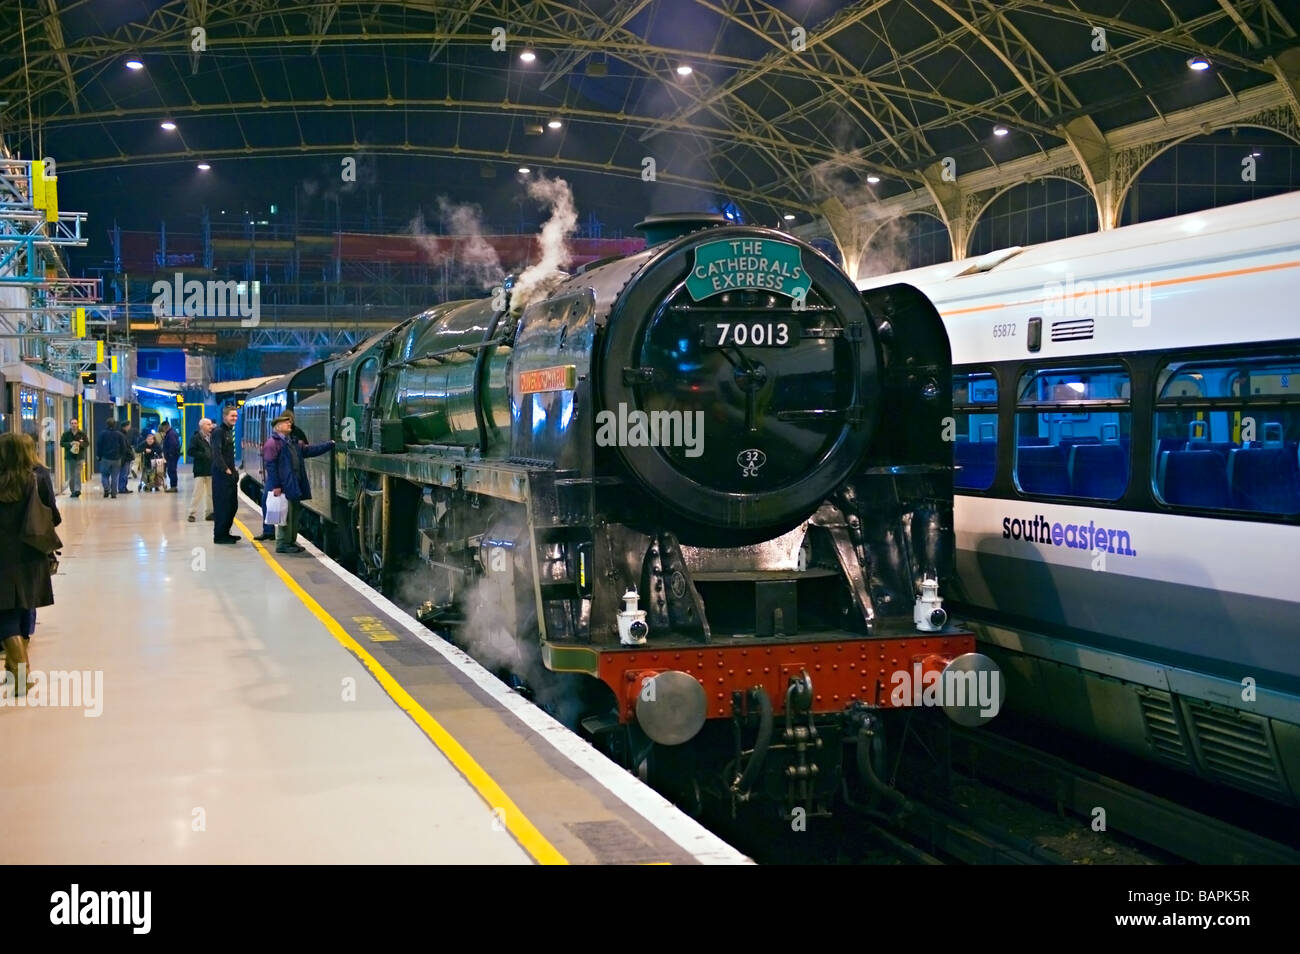 Steam Locomotive 70013 'Oliver Cromwell' at London Victoria Station. Stock Photo